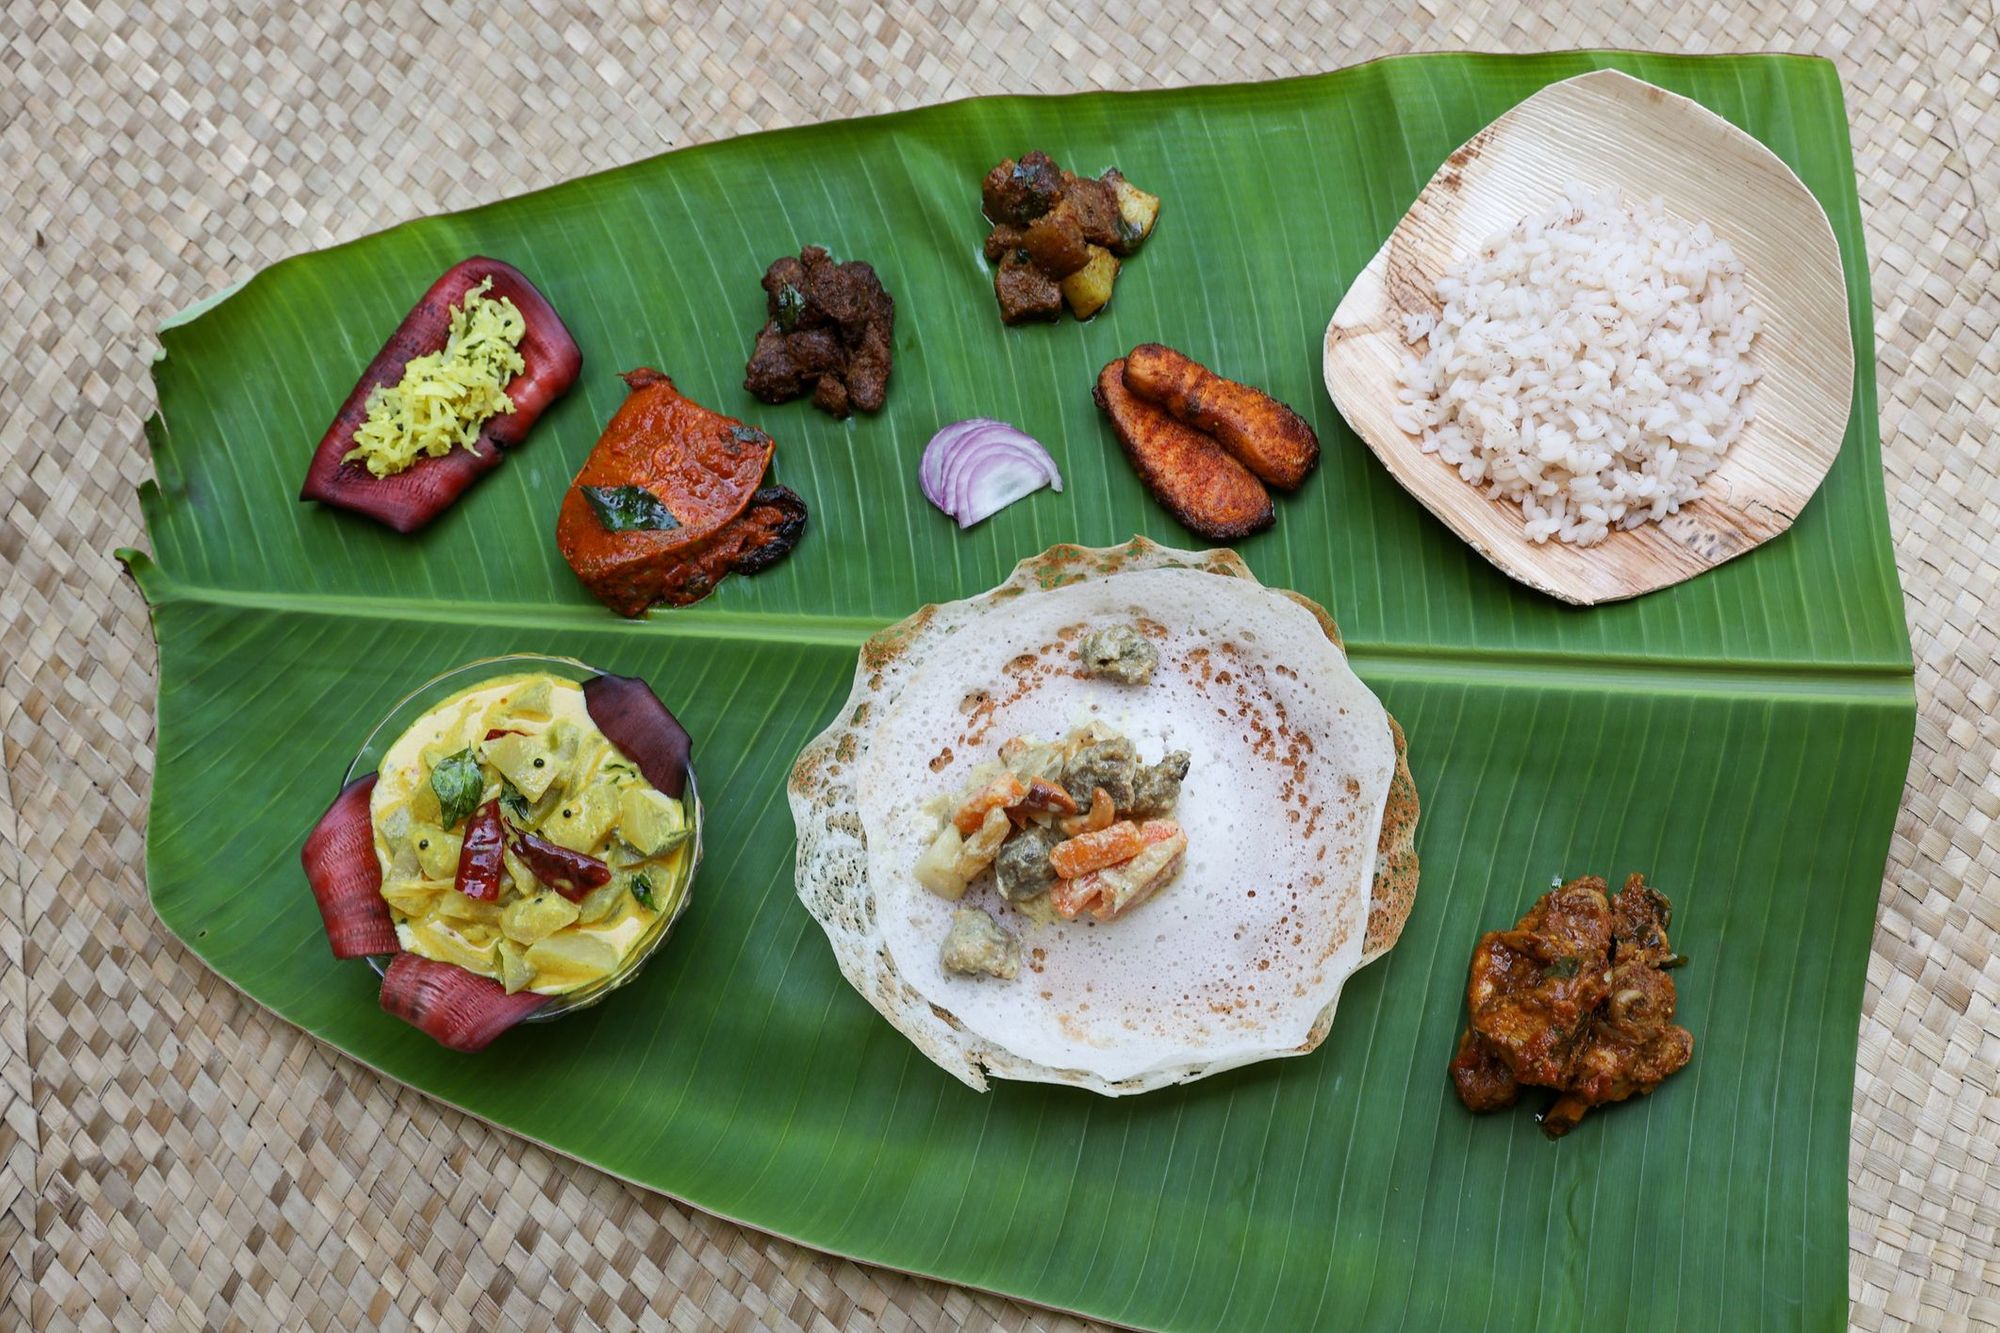 Keralan celebration meal of fish curry, appams, ishtu and more served on a banana leaf